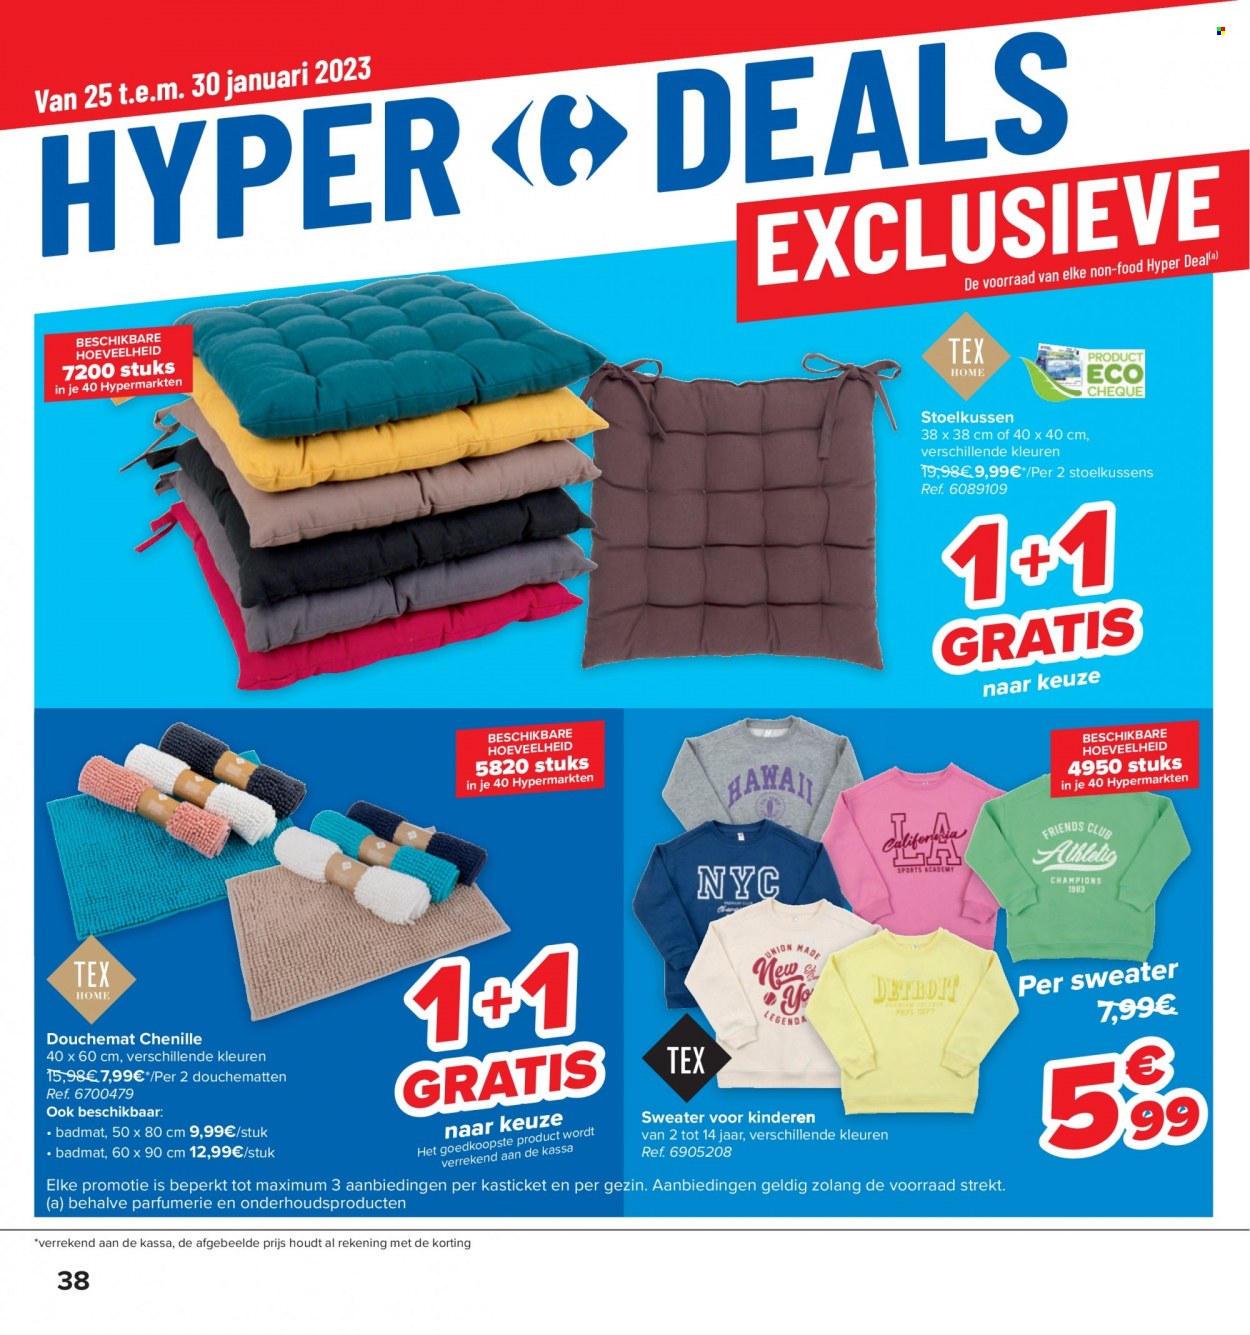 Catalogue Carrefour hypermarkt - 25.1.2023 - 6.2.2023. Page 18.